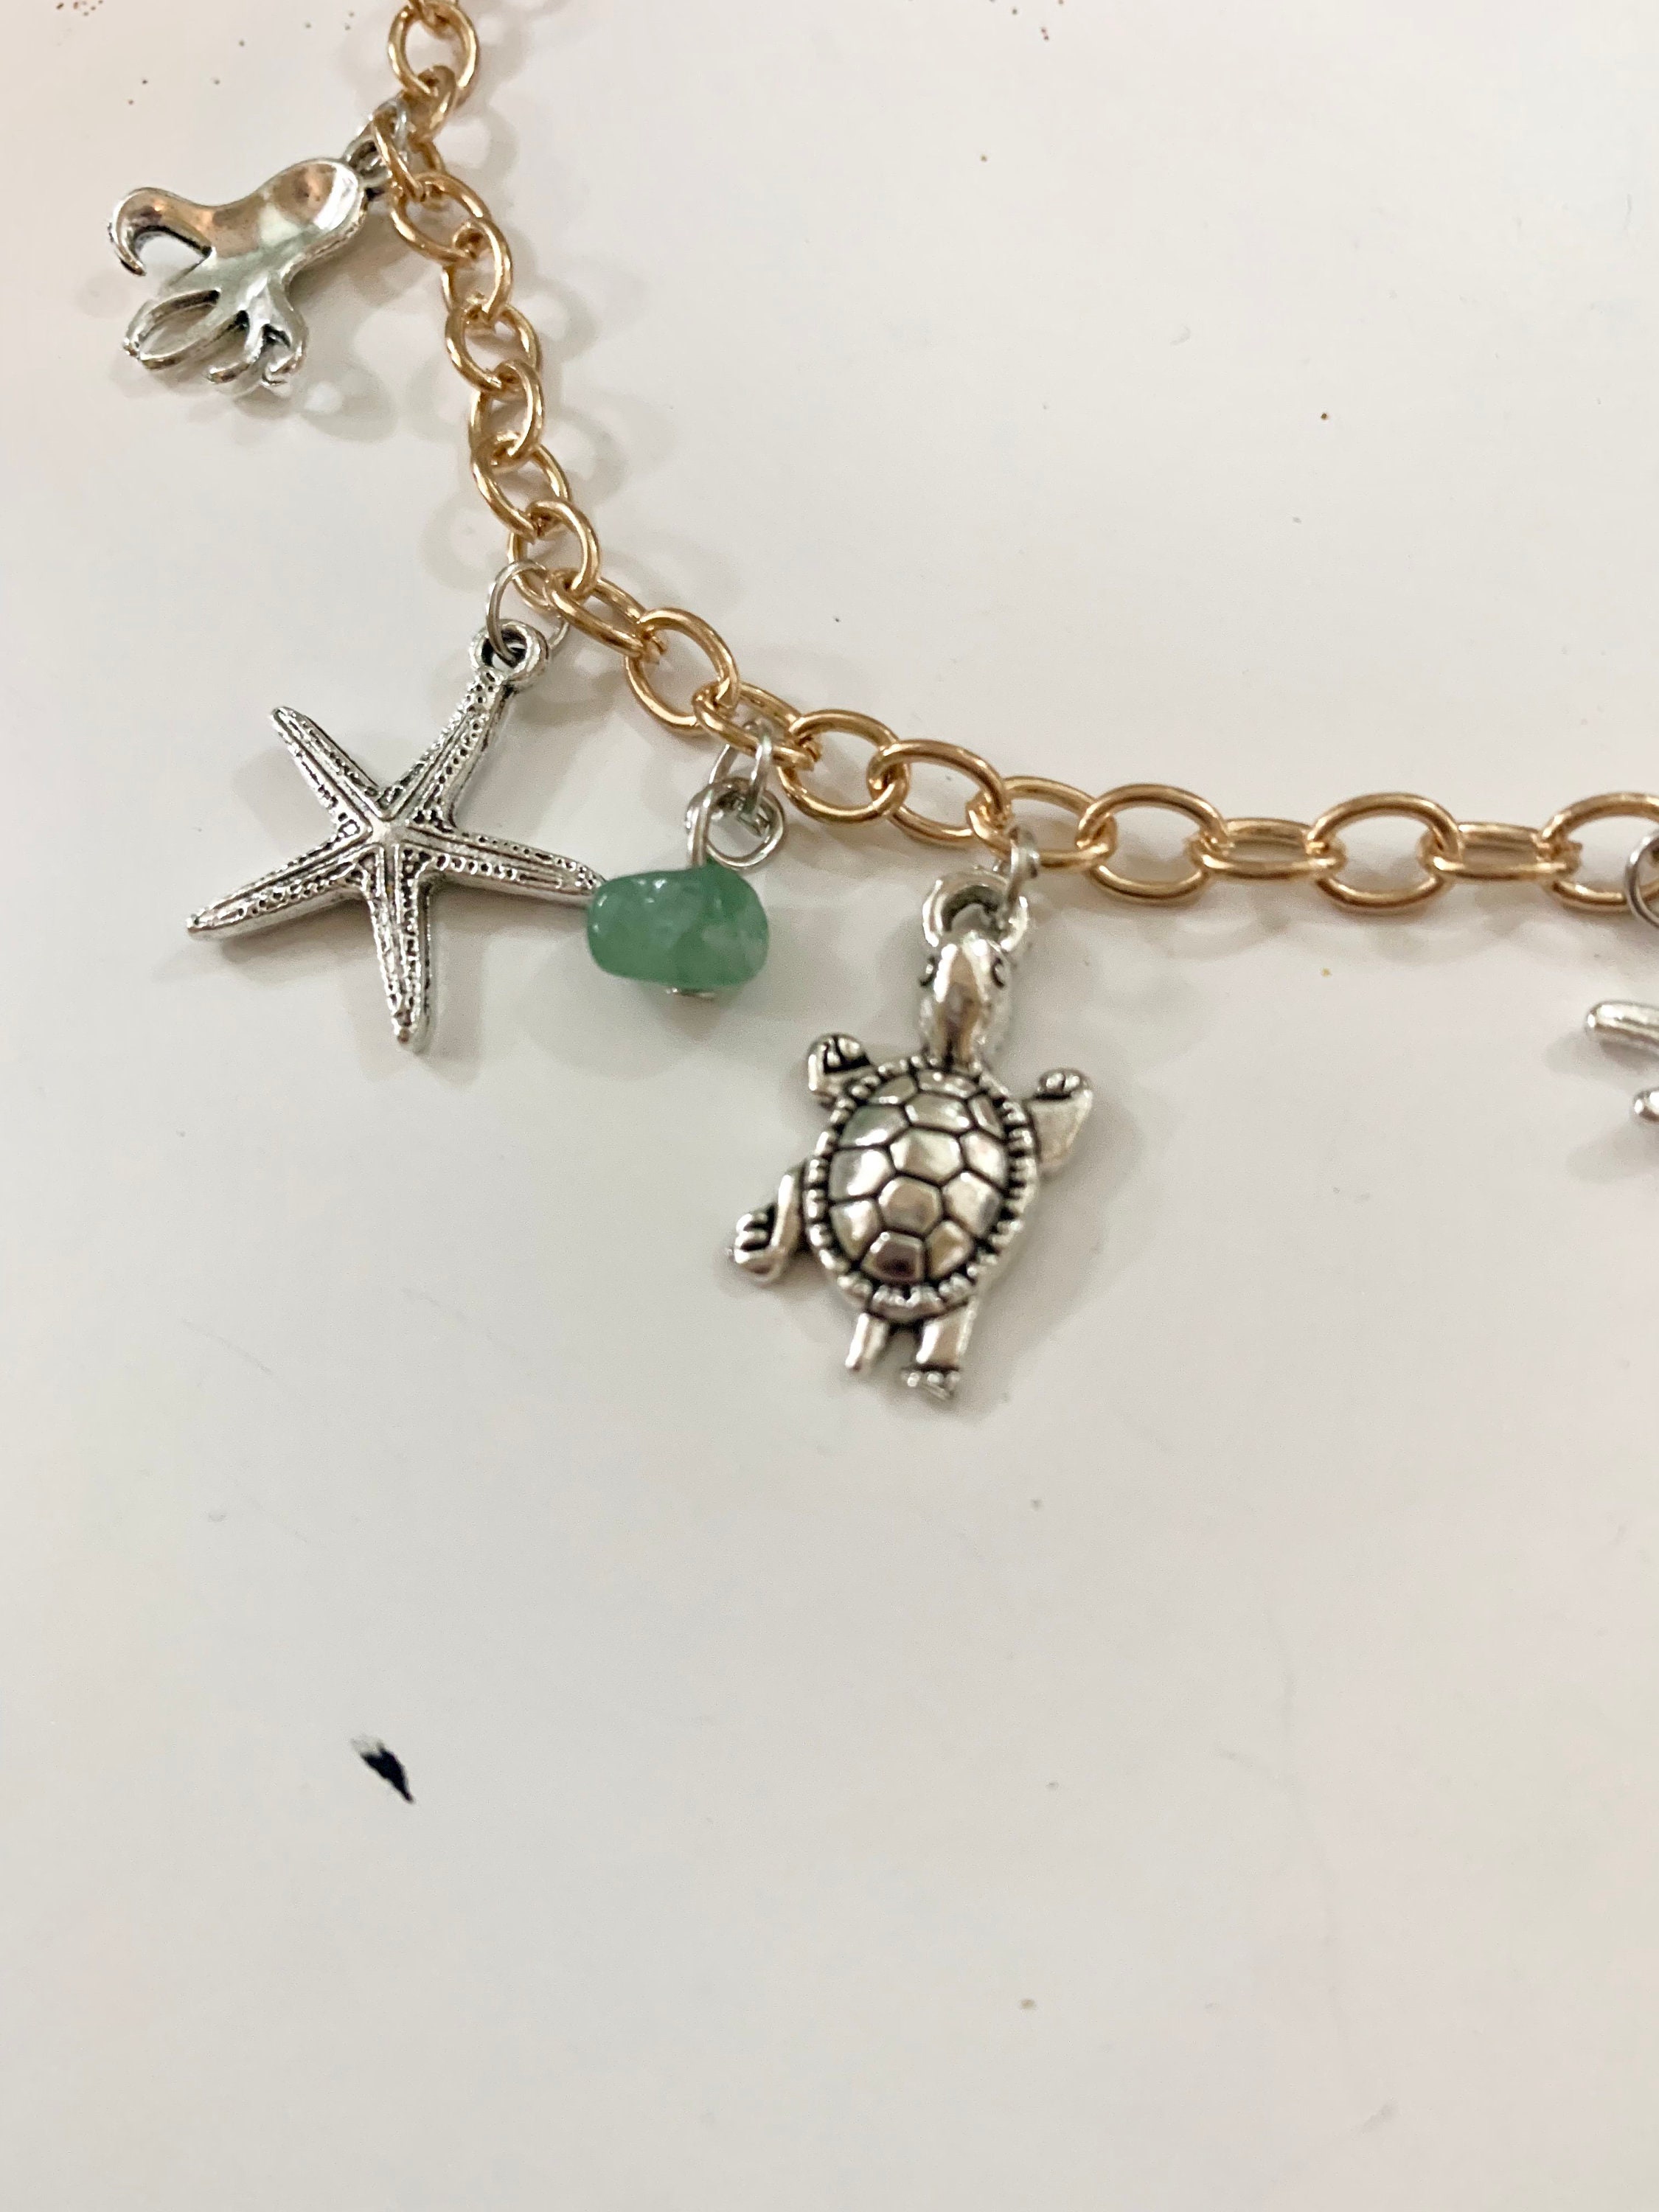 Clip on Charms and Charm Bracelet Starters, Necklace. Make a custom gift!  Sea Turtle, Cross, Hope, Scissors, peace - more! Wholesale Prices